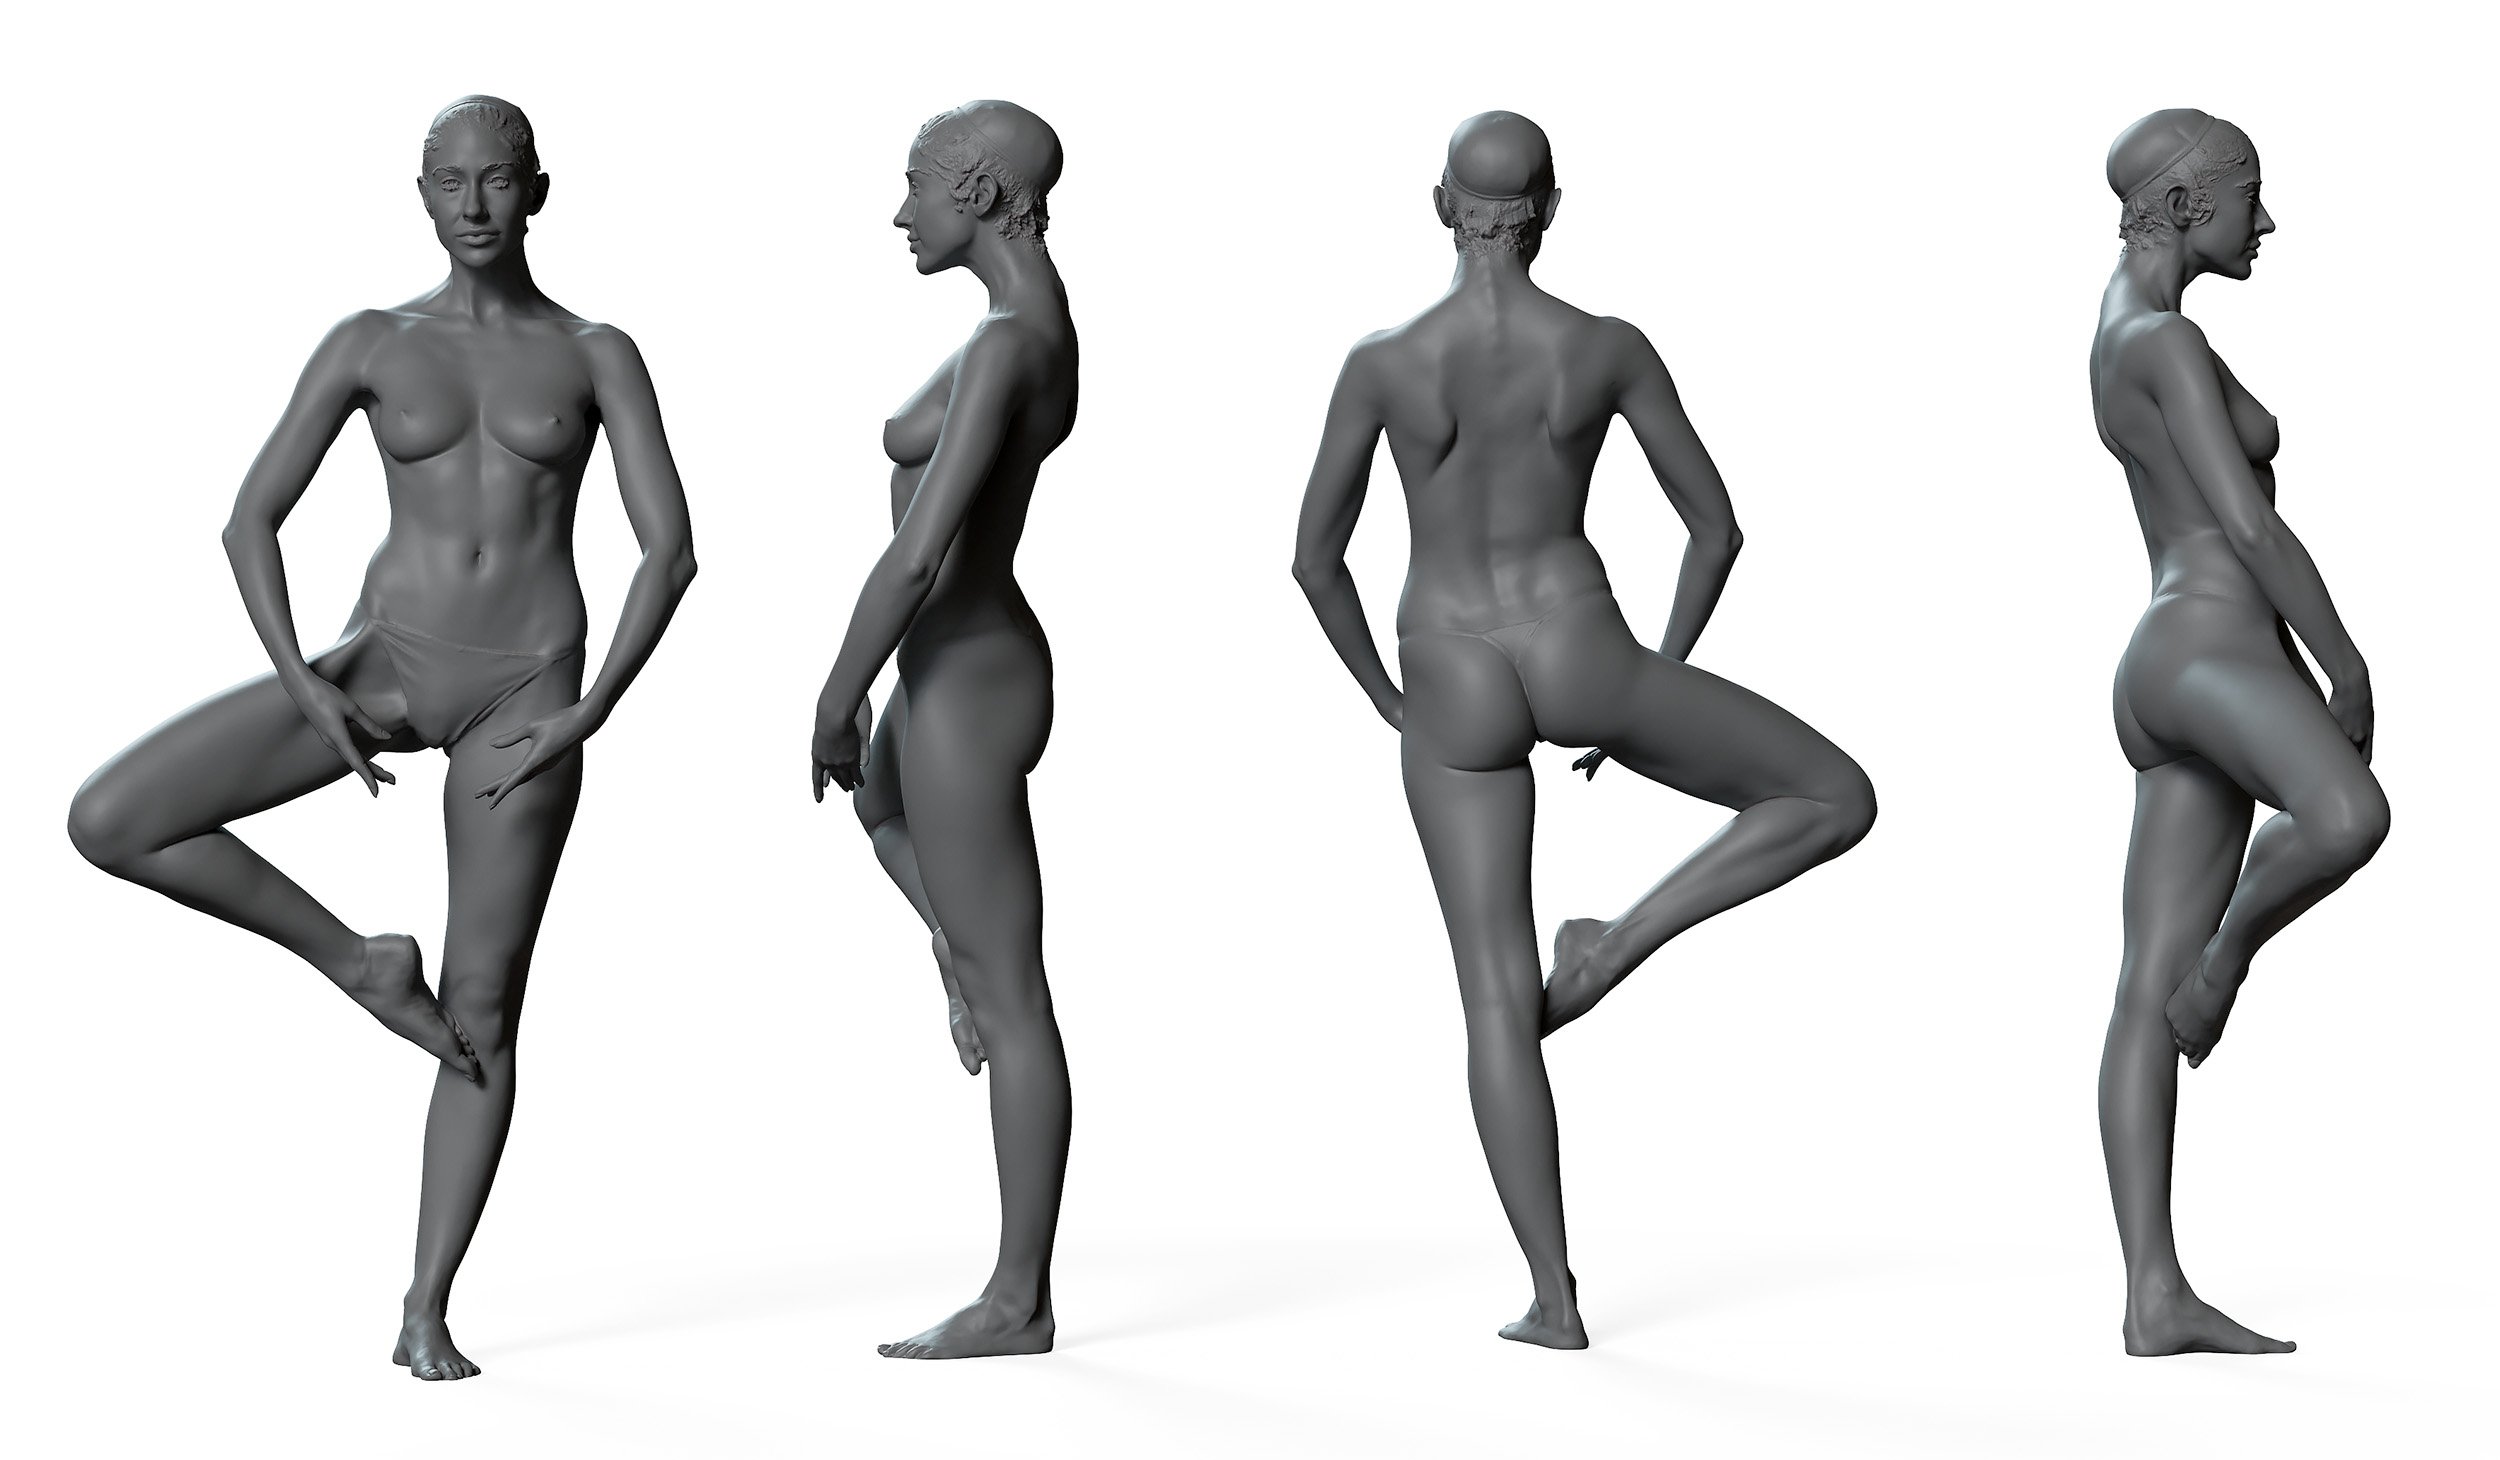 Nude models reference